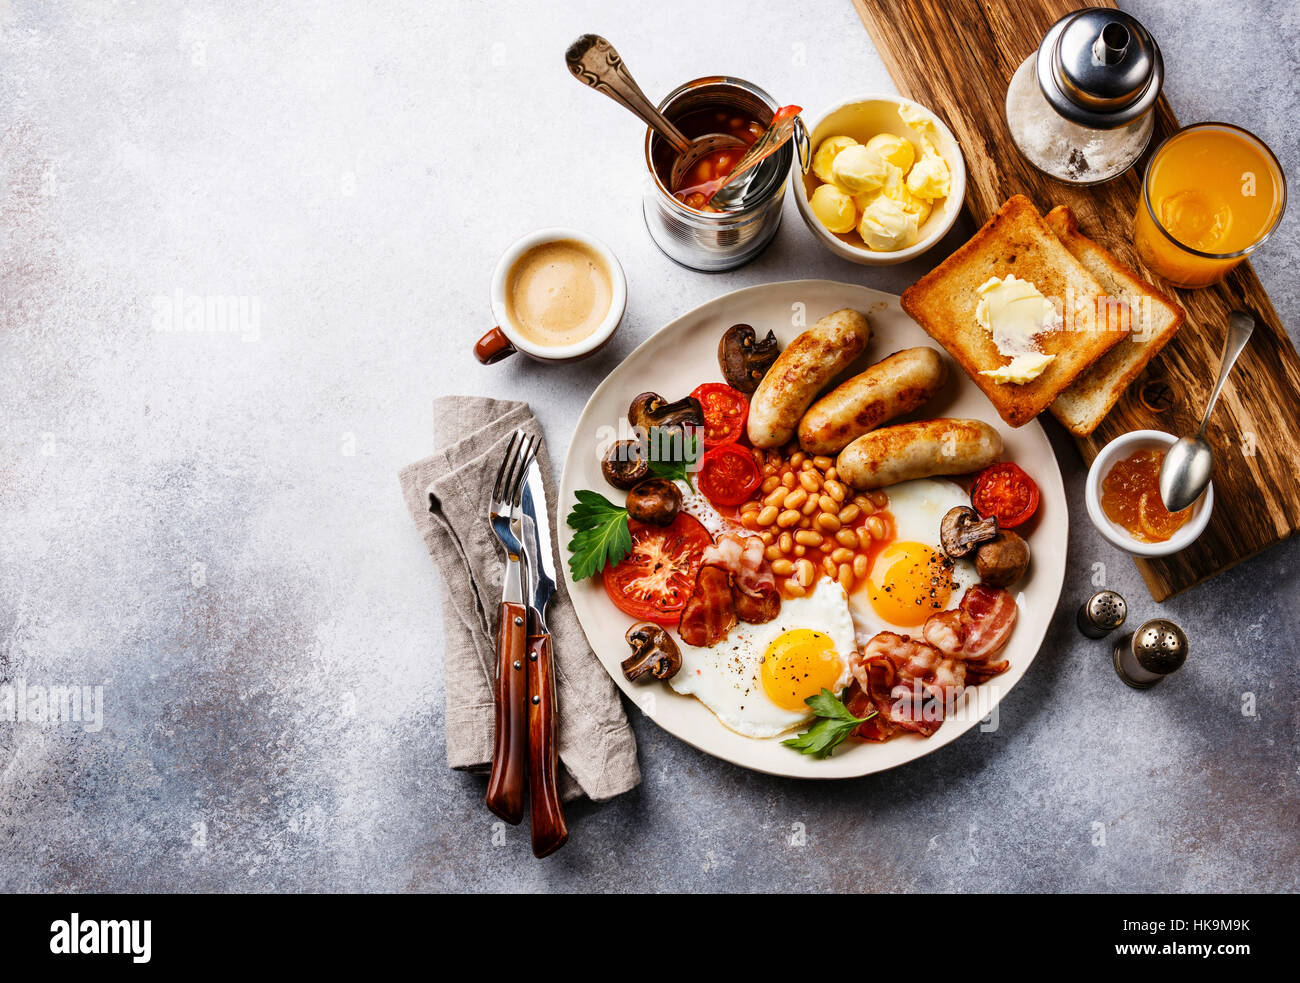 Full English breakfast with fried eggs, sausages, bacon, beans, toasts and coffee on copy space background Stock Photo